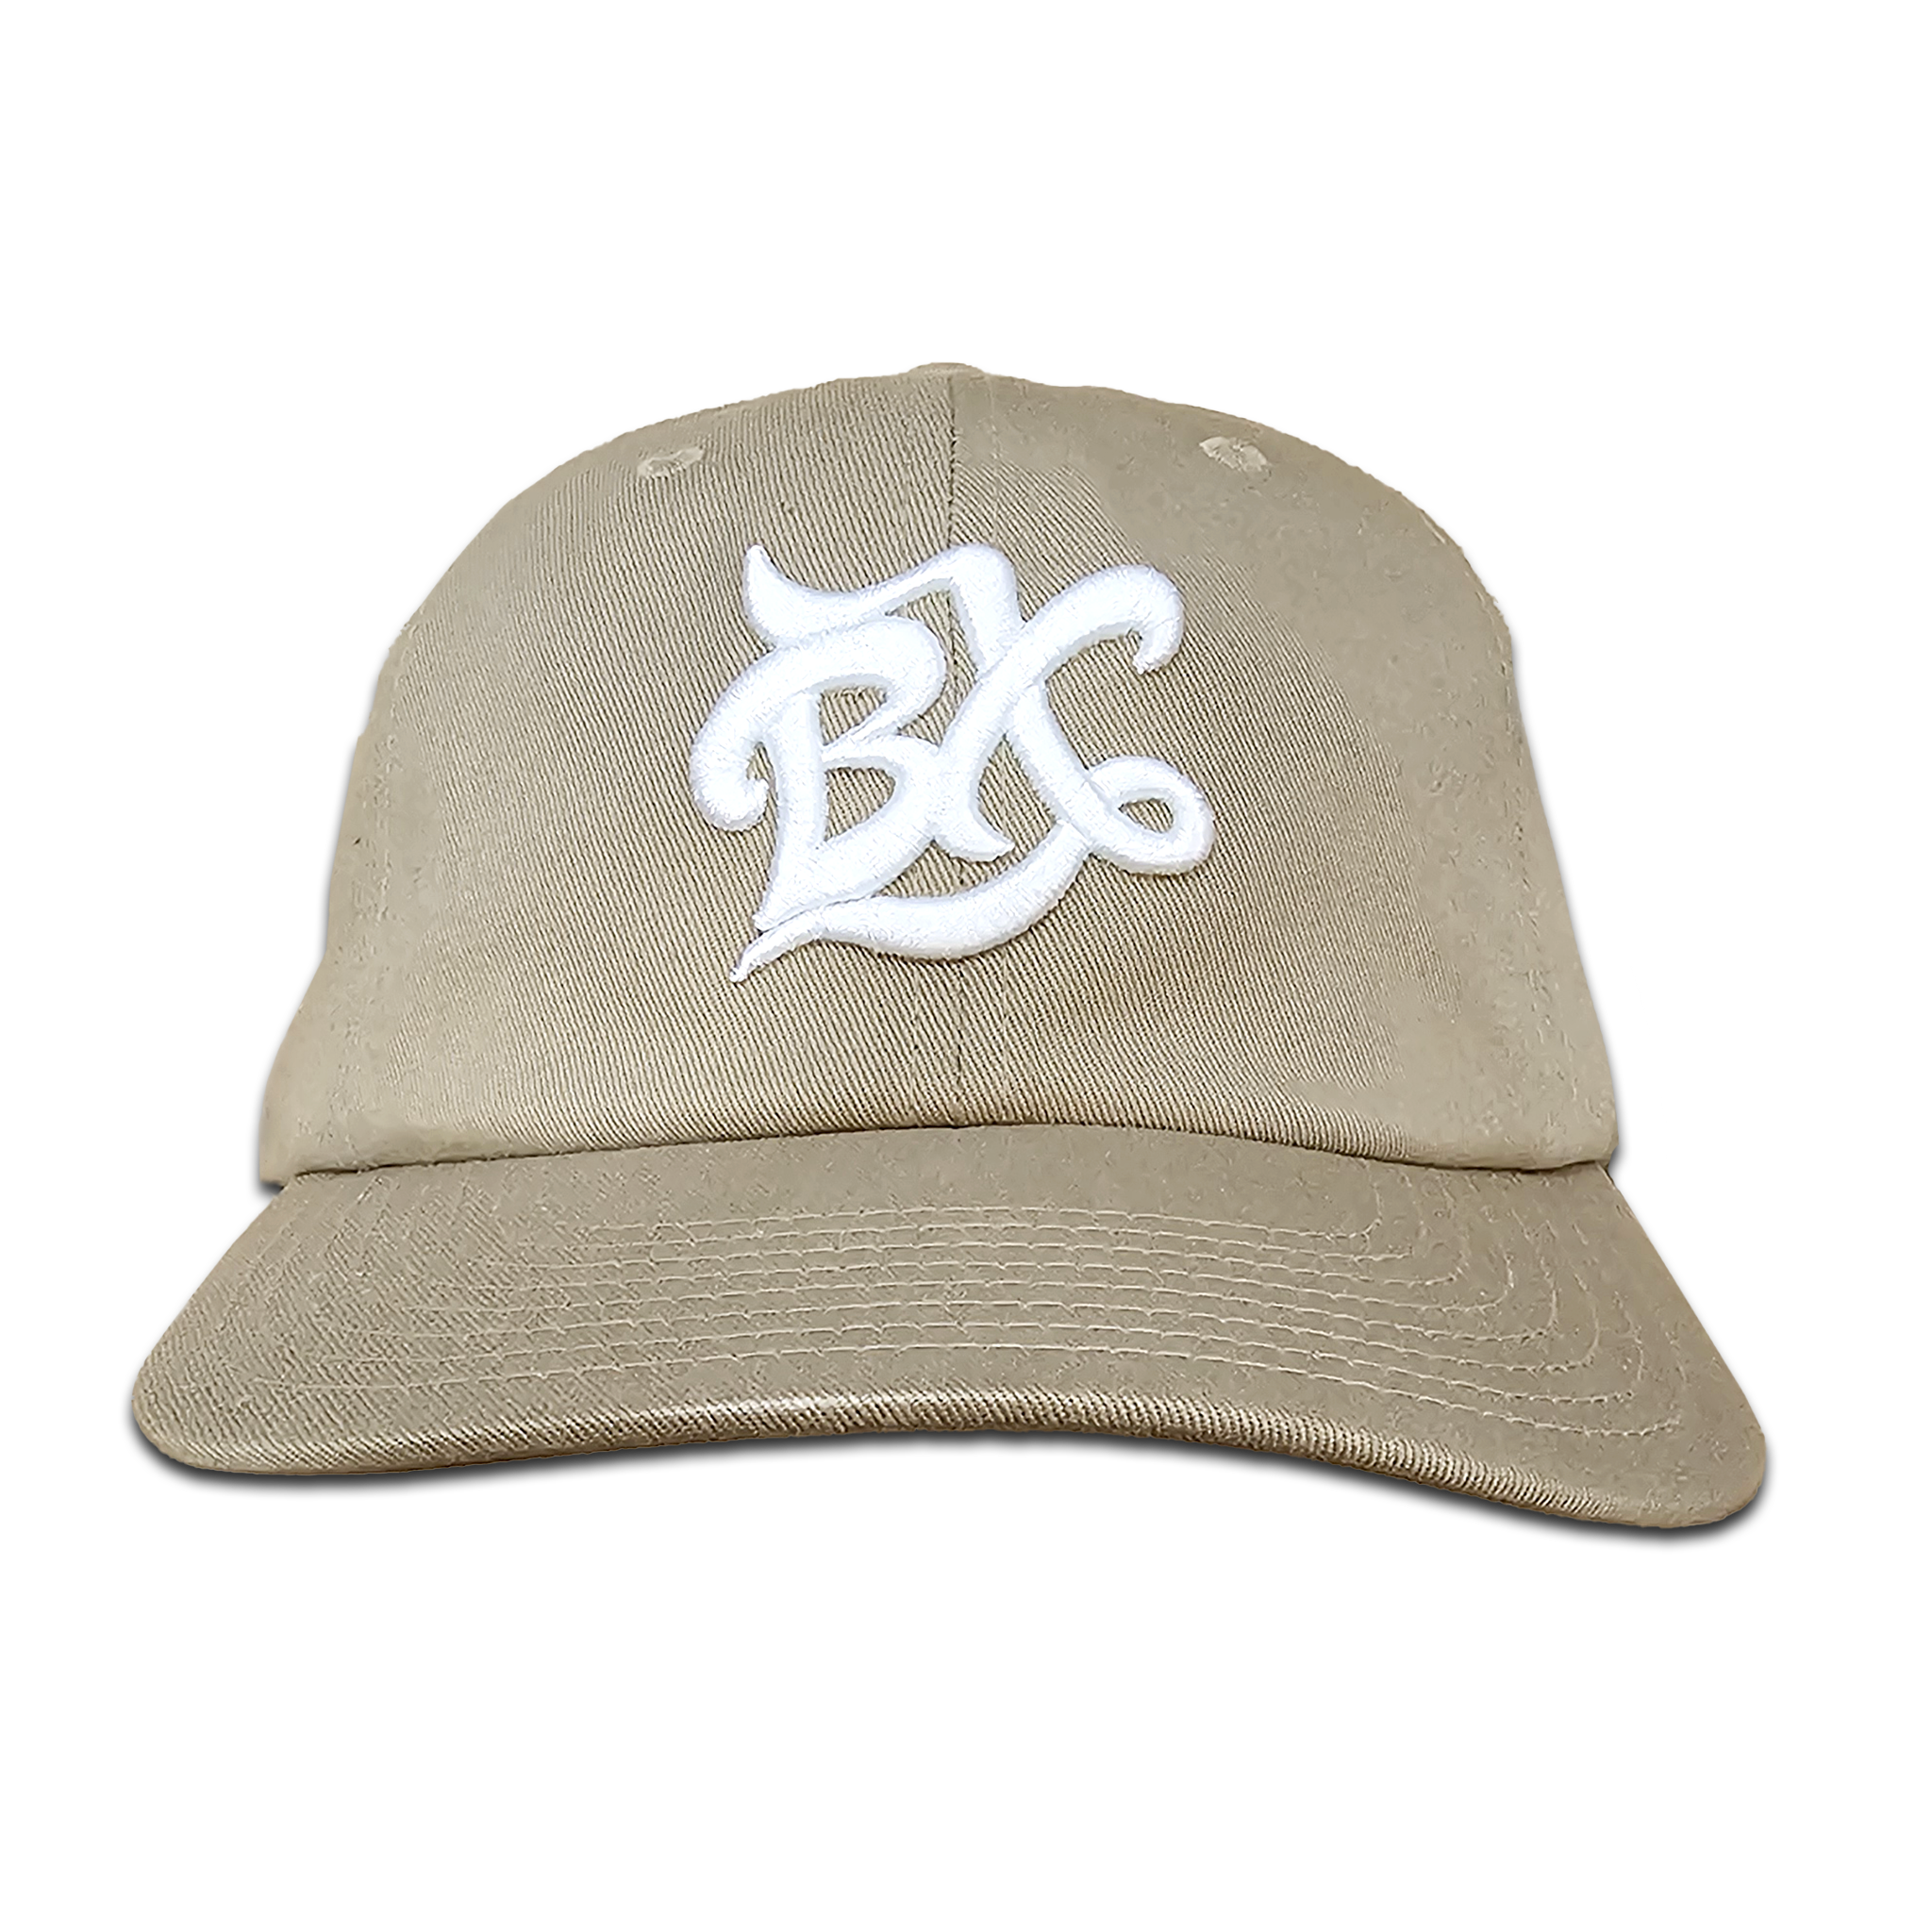 BX Wave Dad Hat in Tan/White Front